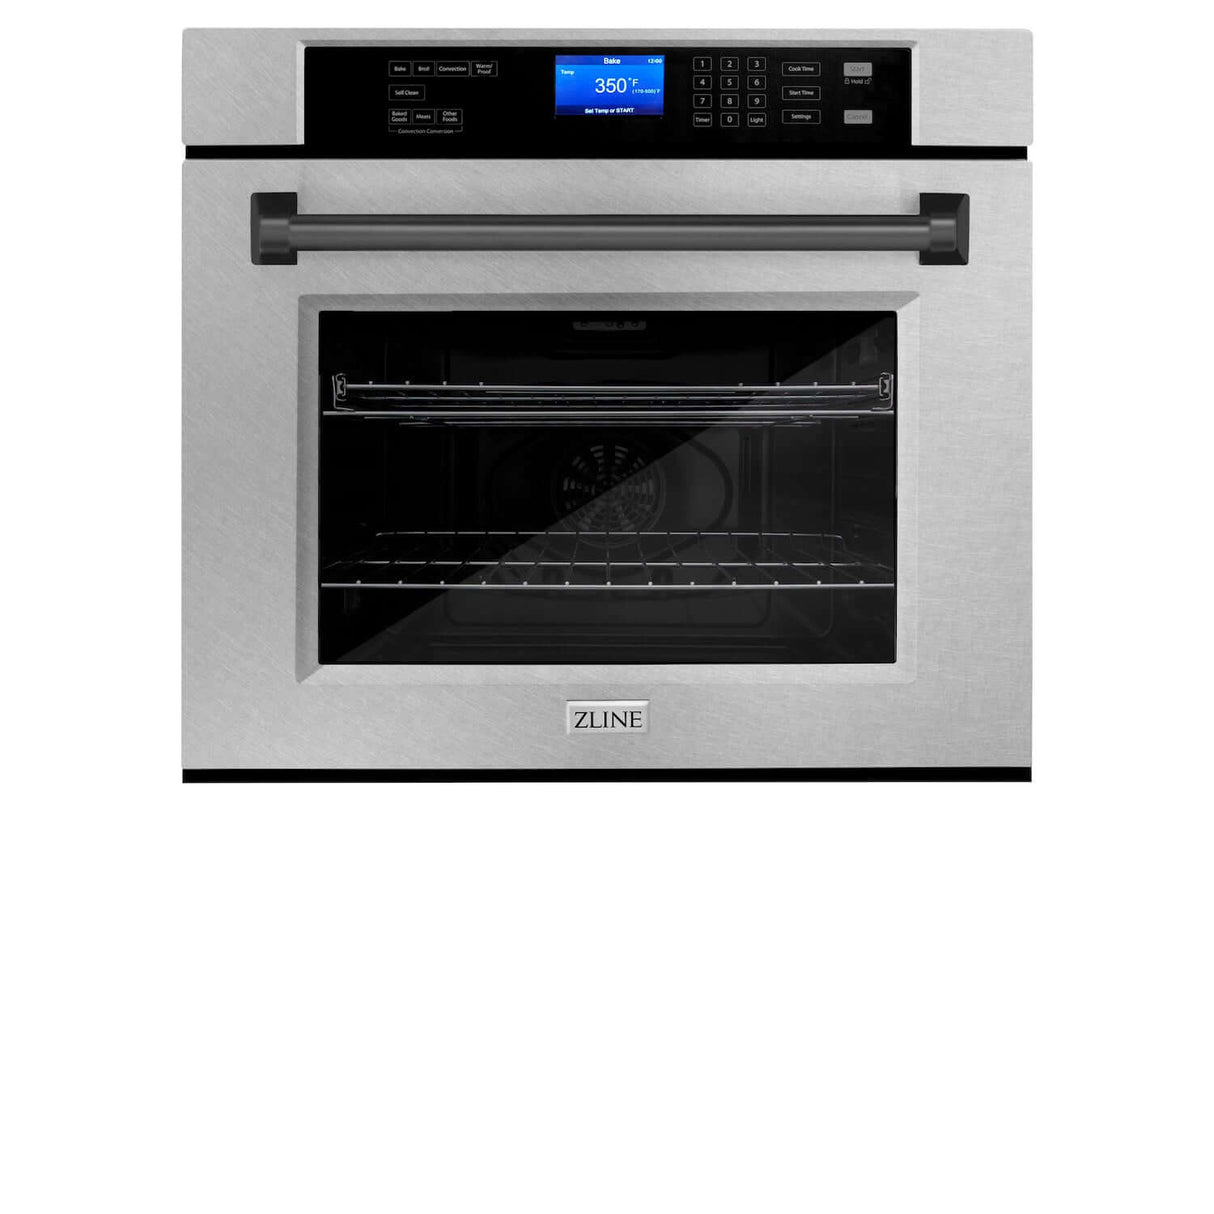 ZLINE Autograph Edition 30 in. Electric Single Wall Oven with Self Clean and True Convection in Fingerprint Resistant Stainless Steel and Matte Black Accents (AWSSZ-30-MB)